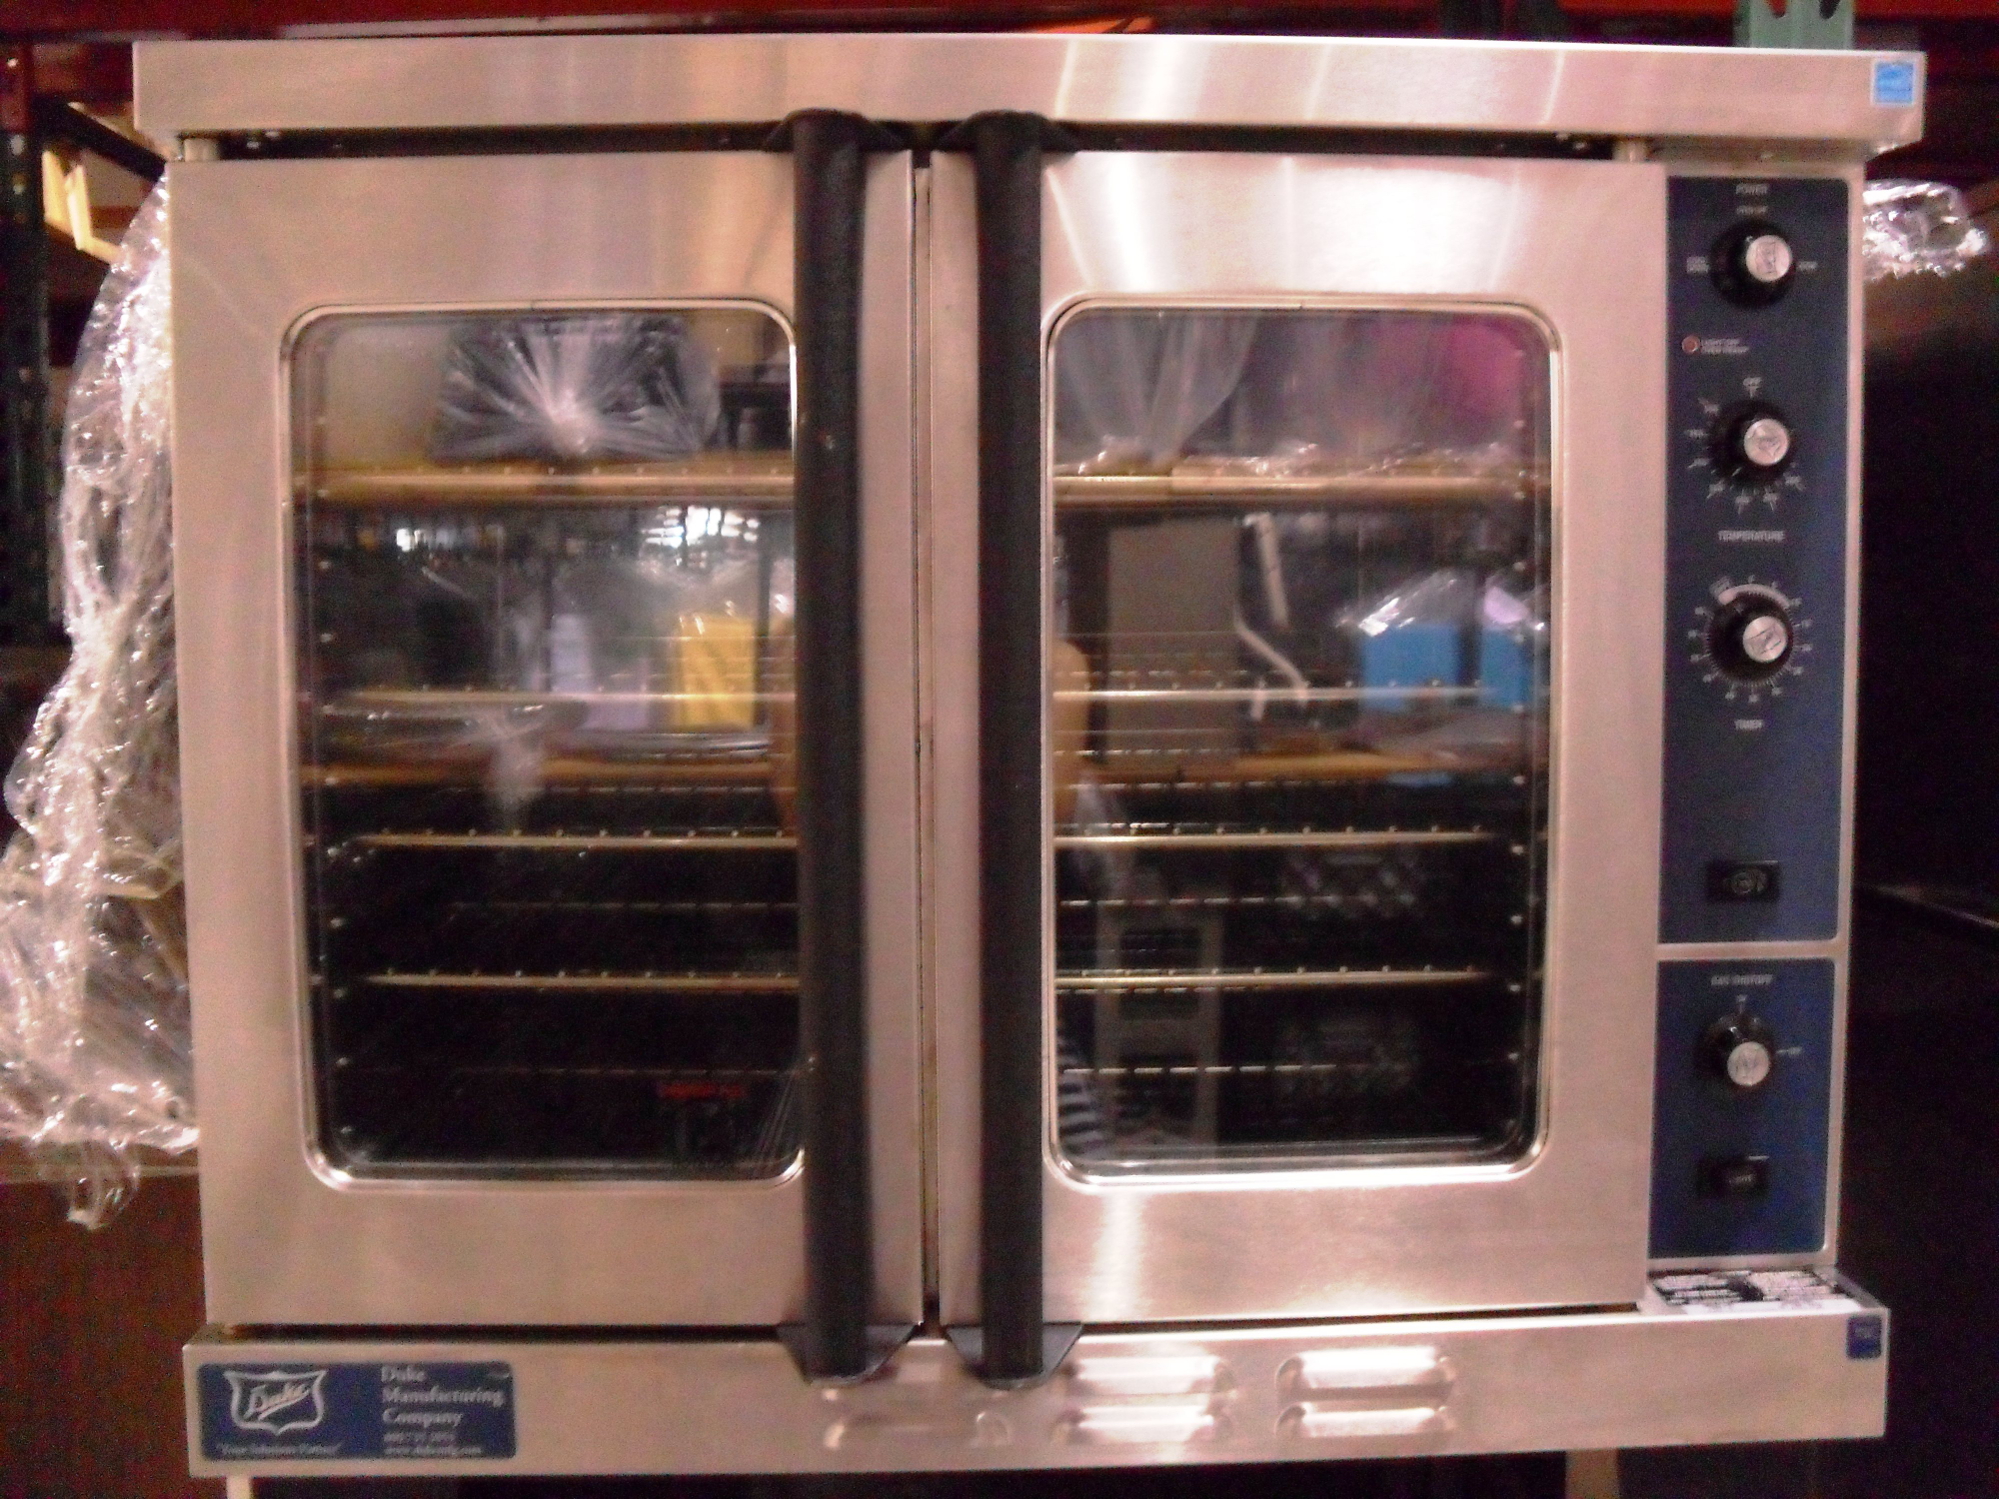 https://tlceventrentals.com/wp-content/uploads/2014/11/products-propane_convection_oven.jpg